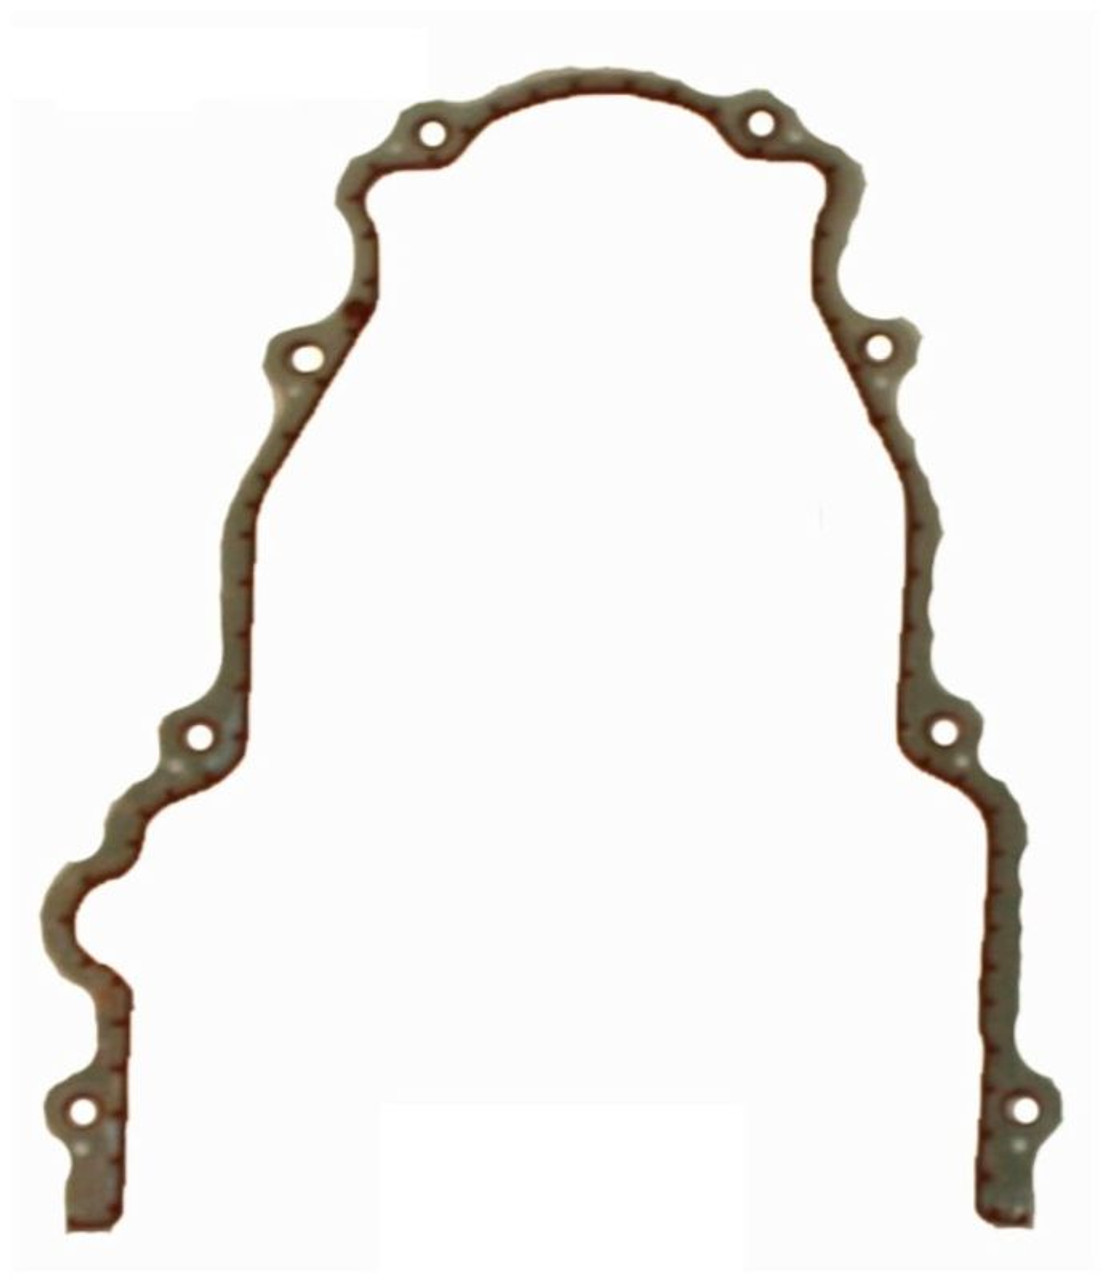 2008 Cadillac Escalade EXT 6.2L Engine Timing Cover Gasket TCG293-A -470